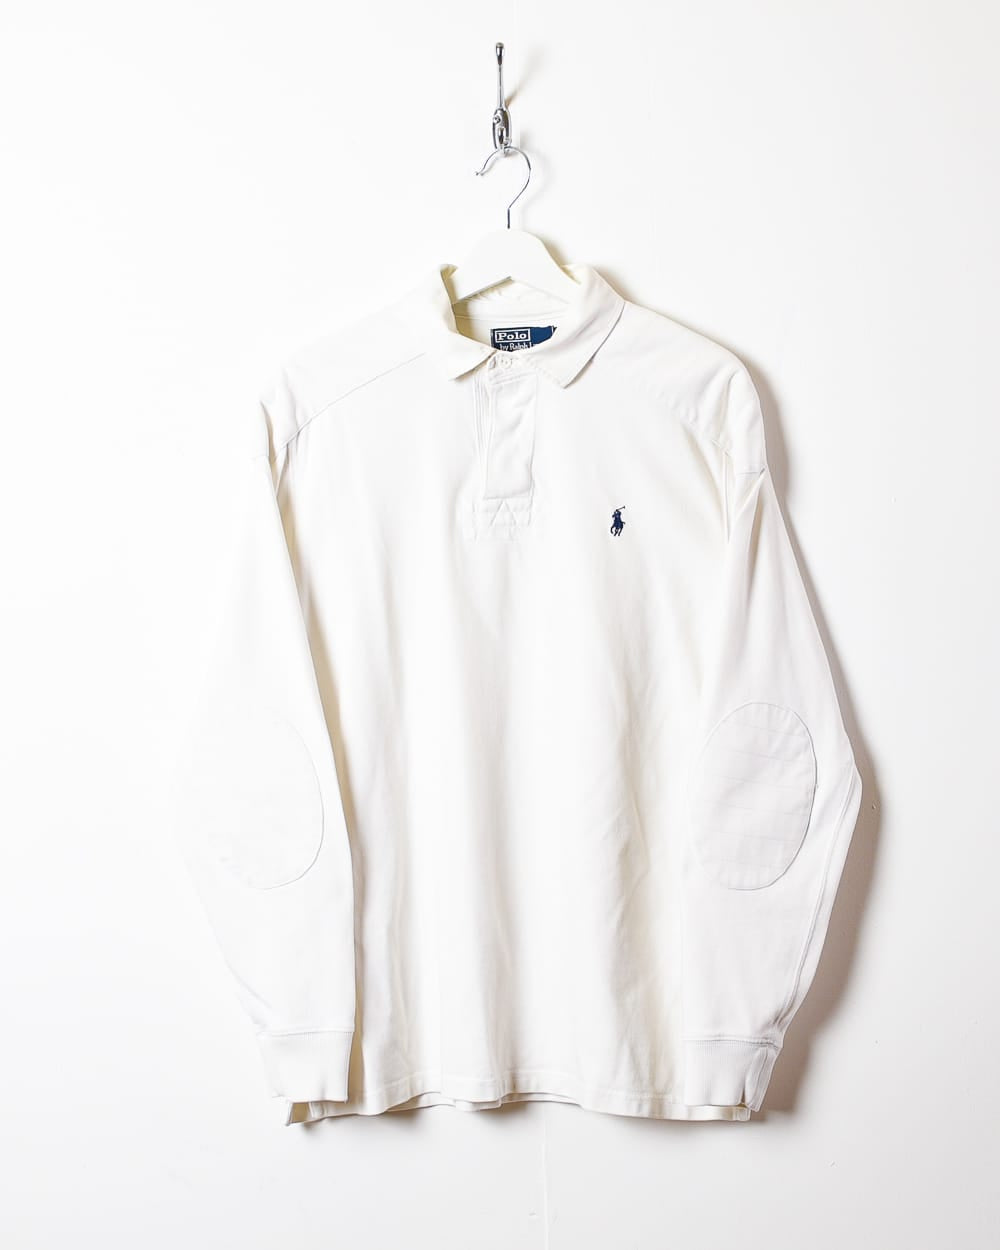 White Polo Ralph Lauren Rugby Shirt - Large